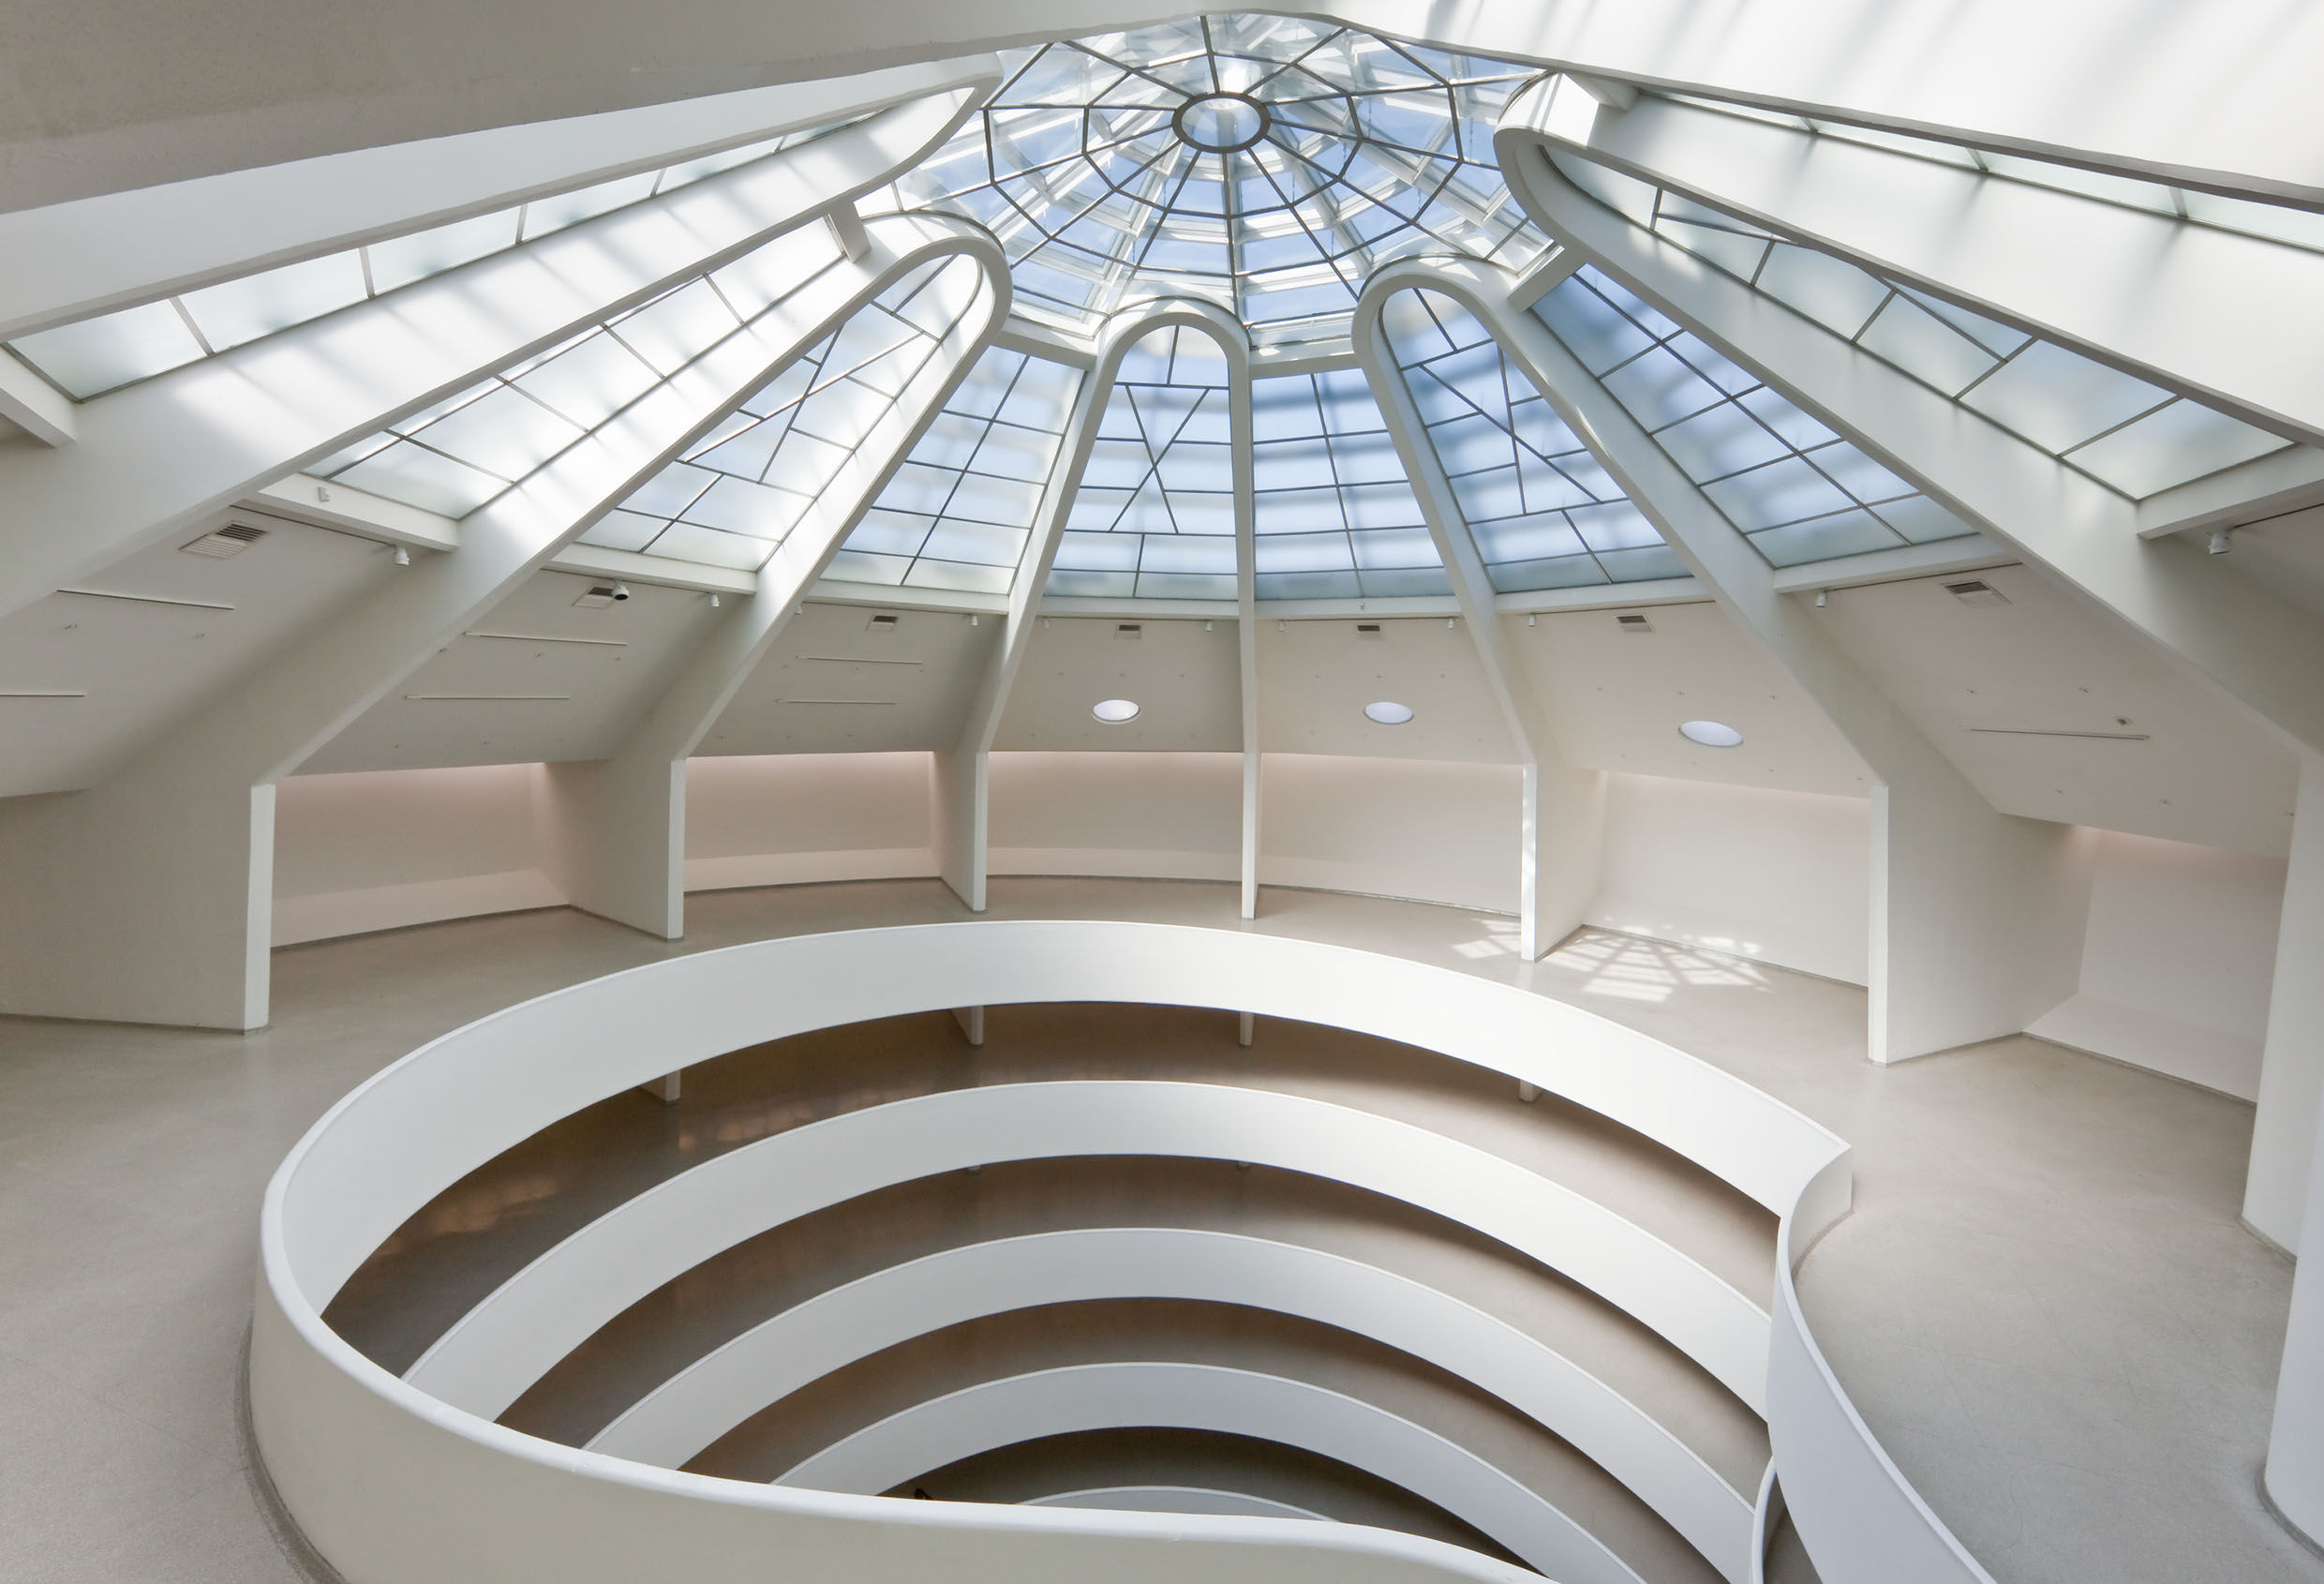 For Kids, Teens, and Families  The Guggenheim Museums and Foundation